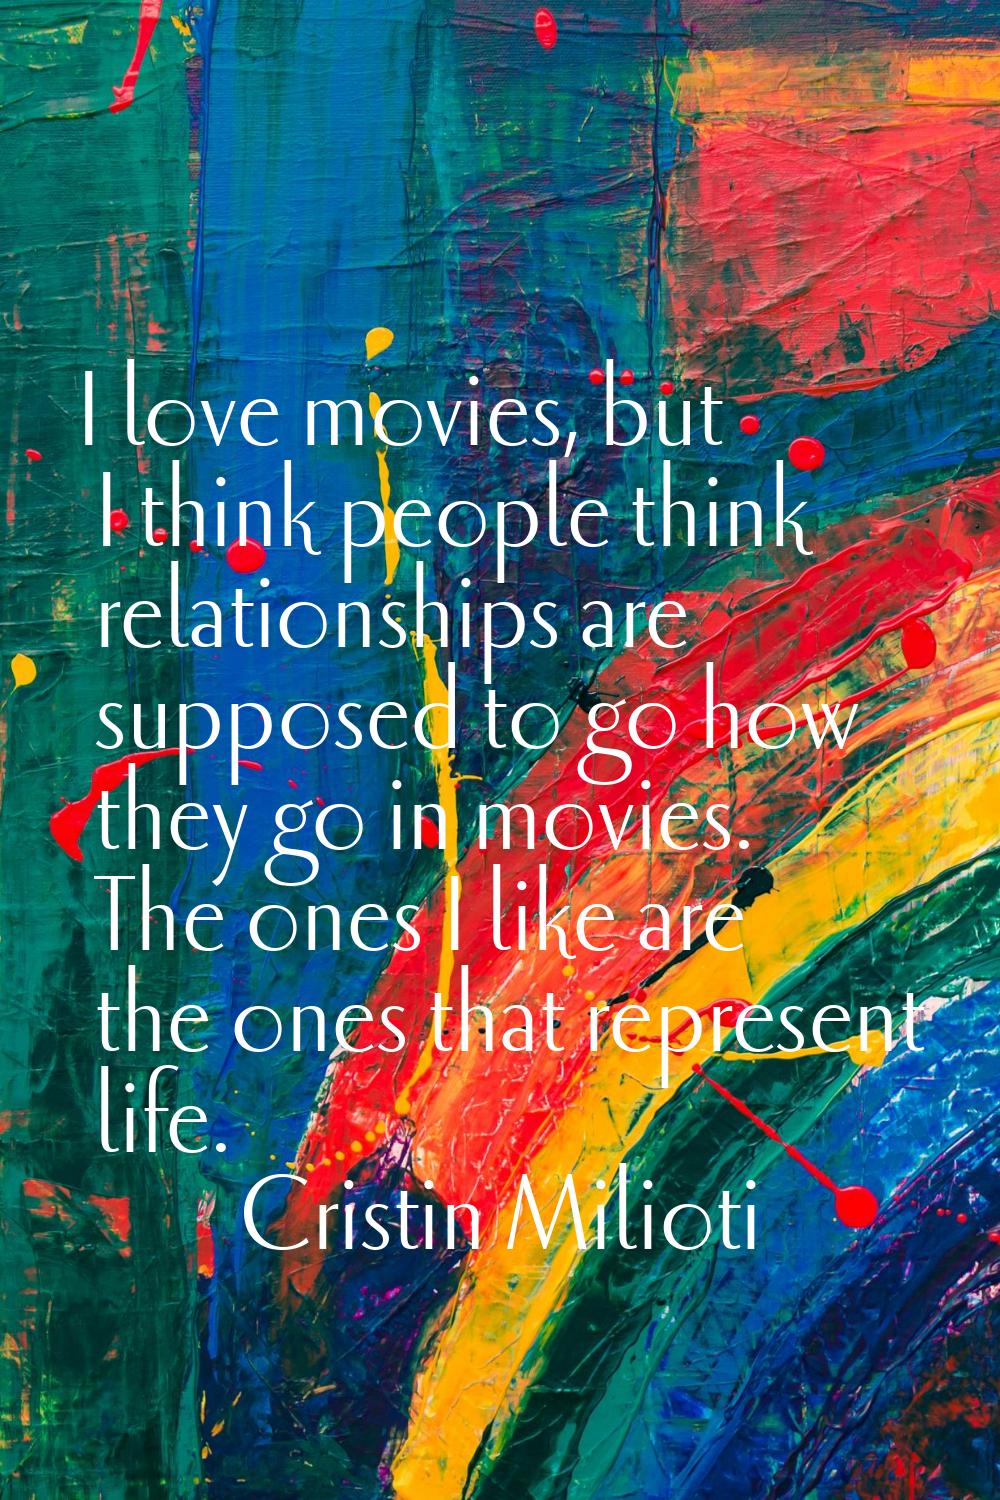 I love movies, but I think people think relationships are supposed to go how they go in movies. The